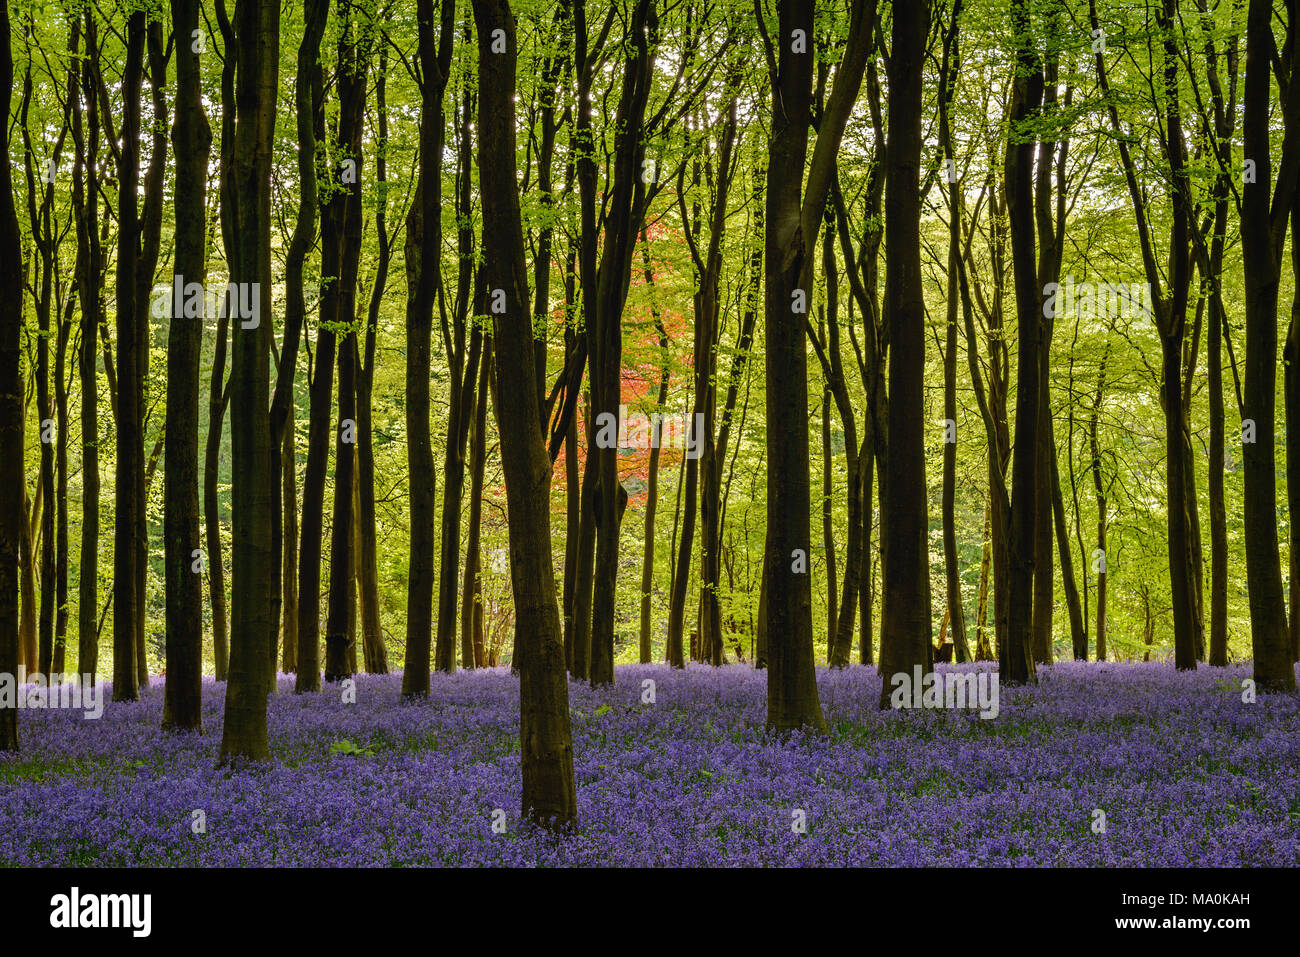 Bluebells in woods near to Micheldever, Hampshire. Looking out towards the edge of this beech tree filled woodland, in the middle is a Copper Beech pr Stock Photo